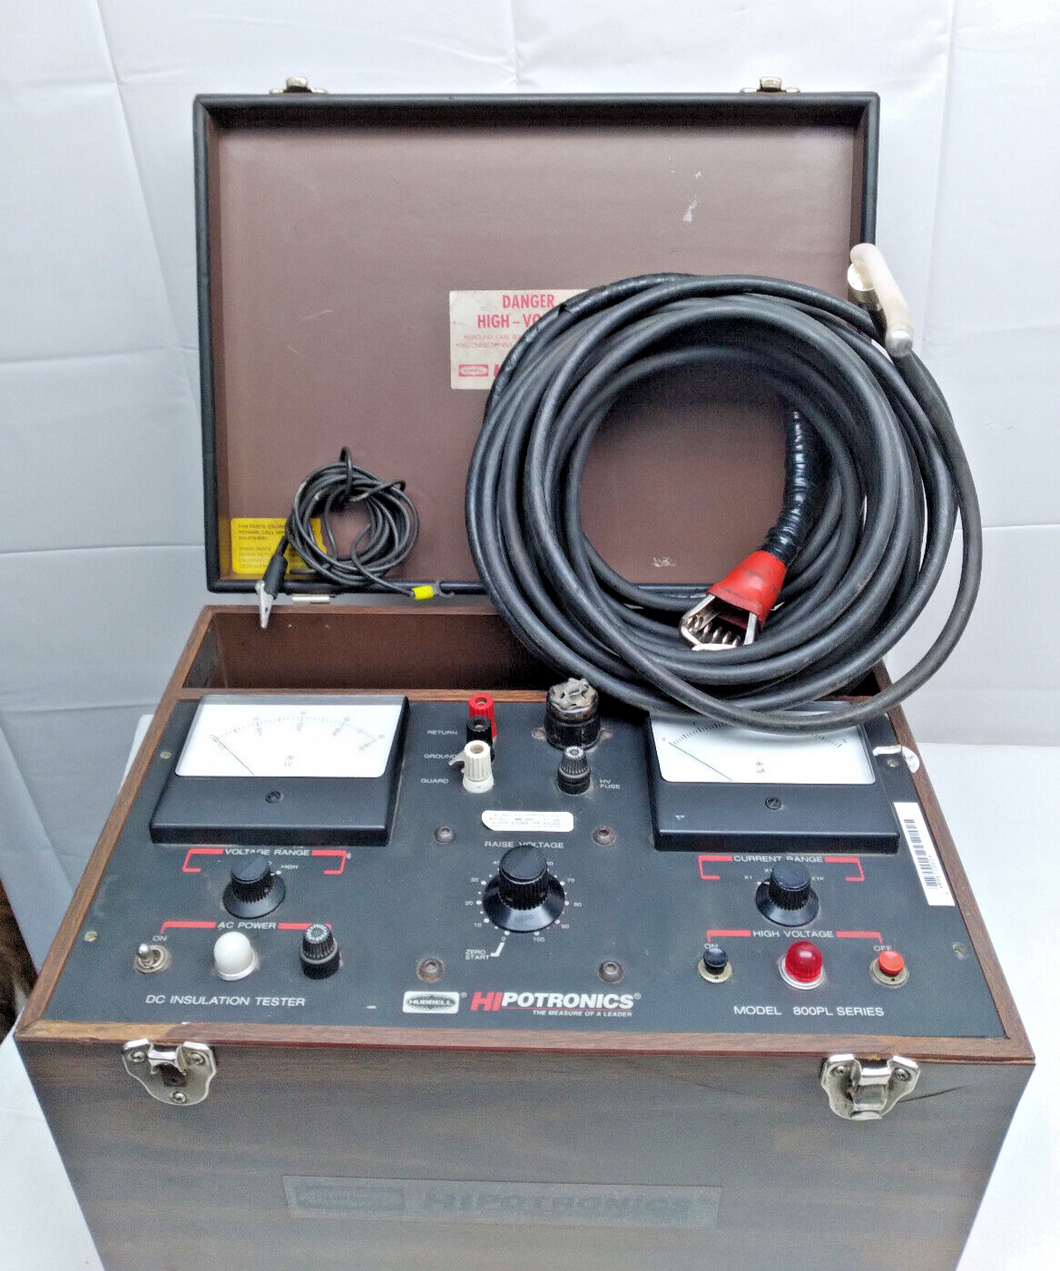 Hipotronics Insulation Tester Model 880PL-A Series, DC Insulation Hipot- USED